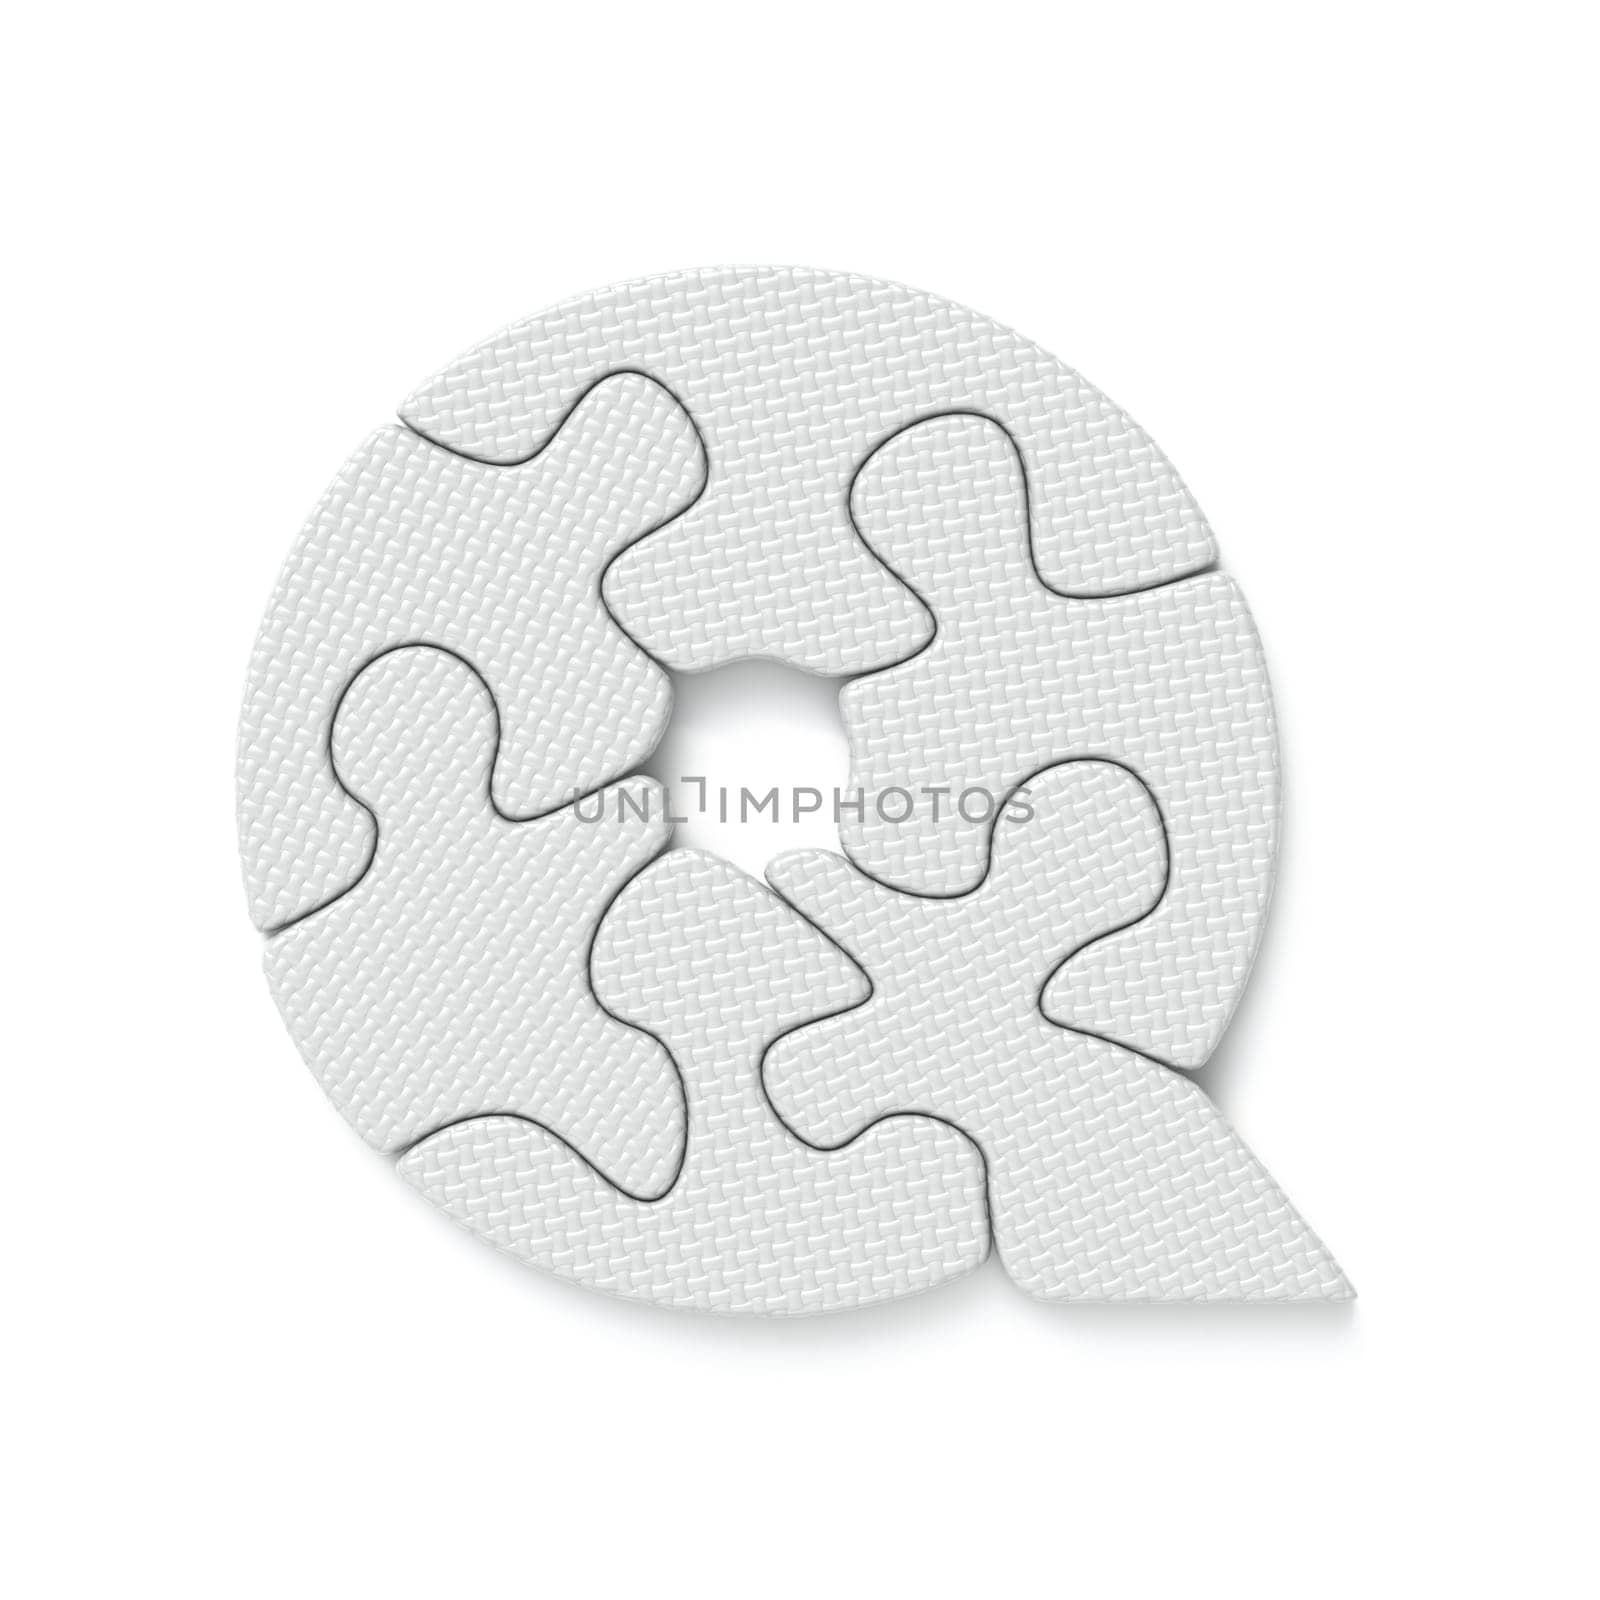 White jigsaw puzzle font Letter Q 3D rendering illustration isolated on white background